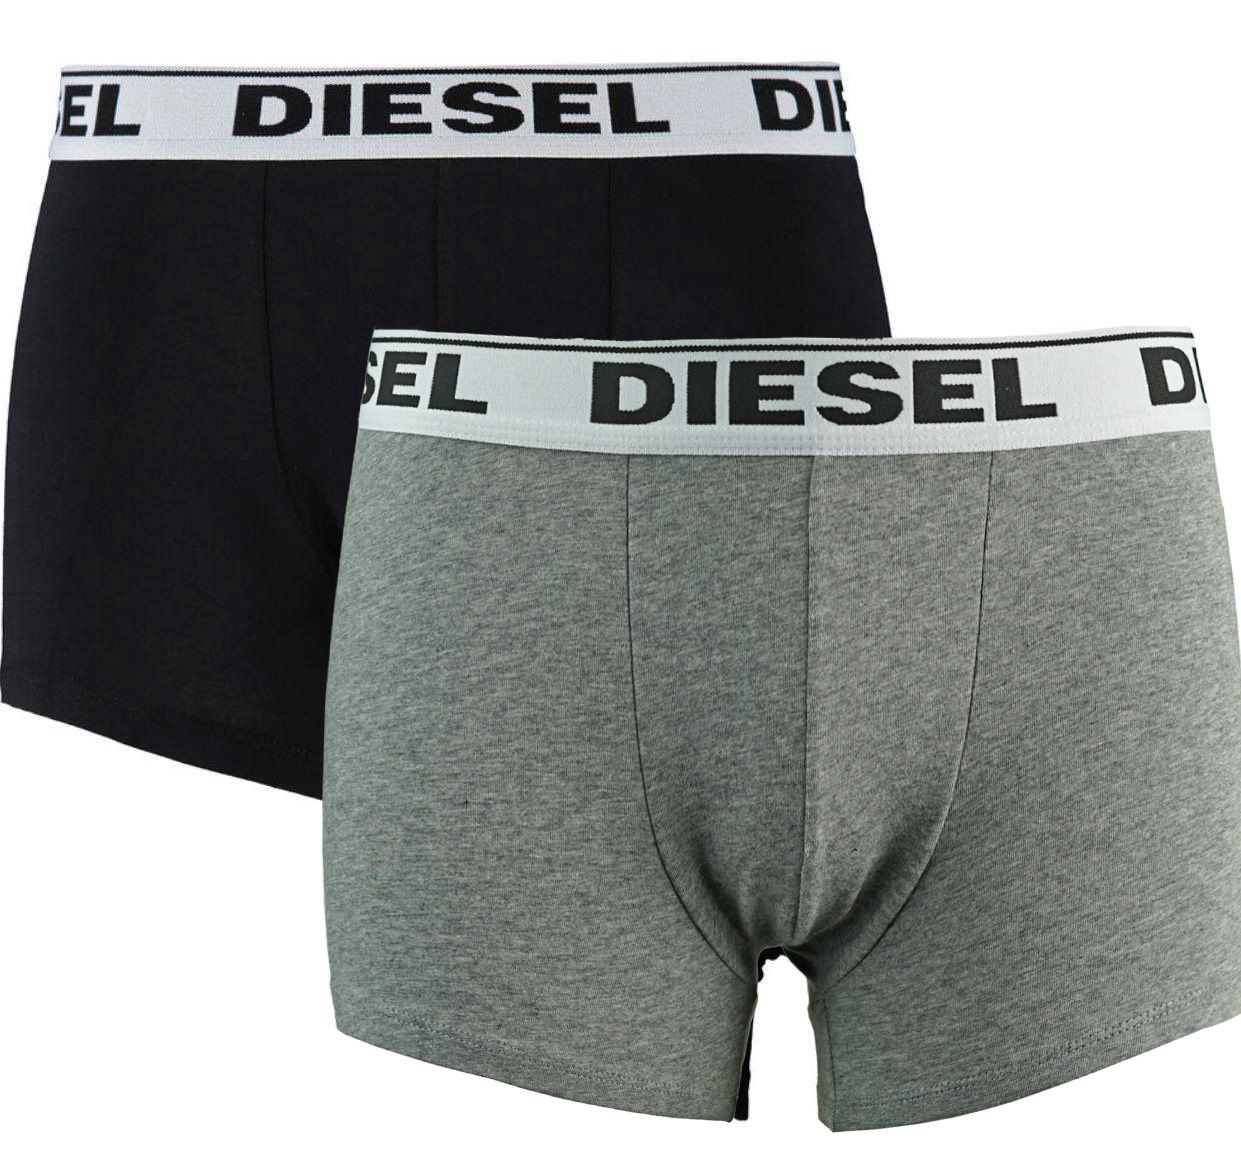 Diesel UMBX-KORY E4102 Boxer Shorts Two Pack. Diesel Mens Boxer Shorts 2 Pack. 95% Cotton 5% Elastane. Stretching Fit. Diesel Branding on Waistband. Style - UMBX-KORYTWOPACK RQARZ E1350